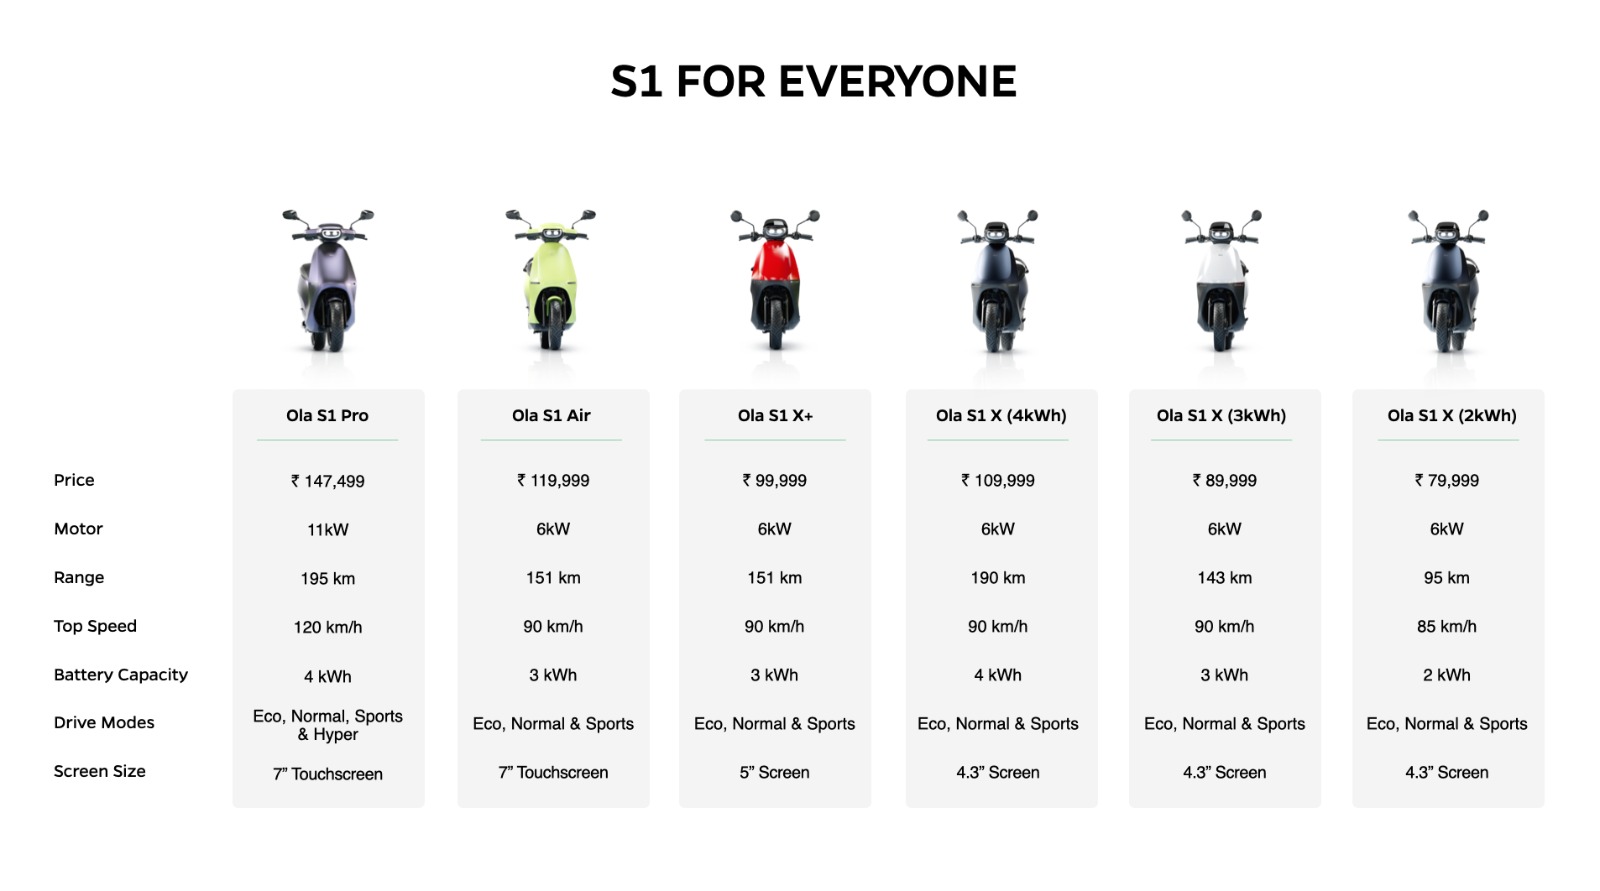 Ola S1X 4kWh Battery Pack Launched With 190 KM RANGE!